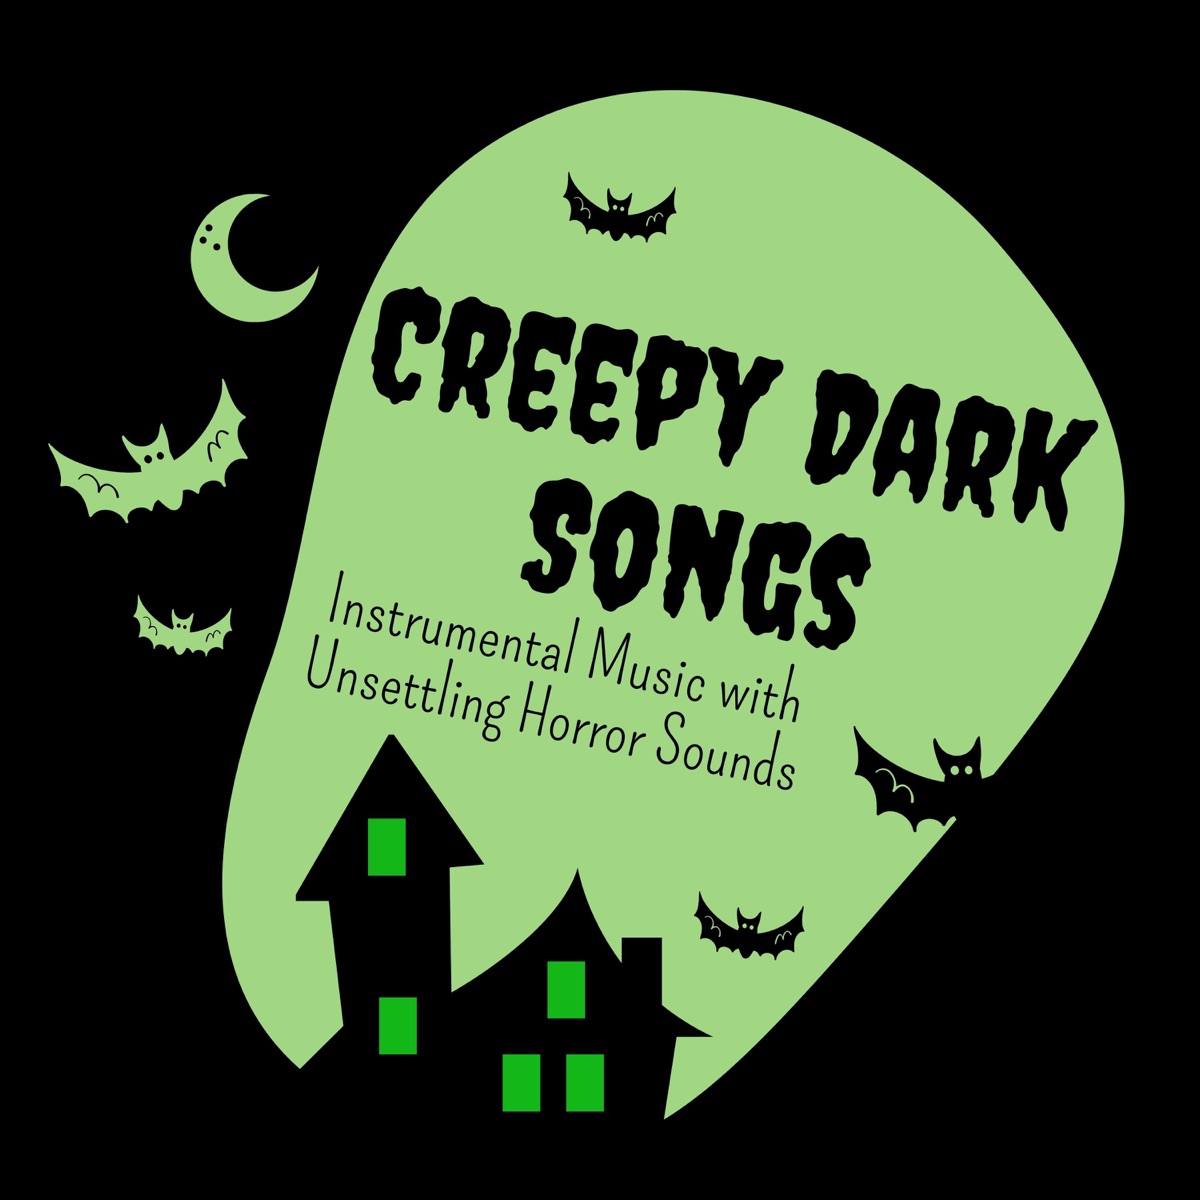 Creepy Dark Songs - Instrumental Music with Unsettling Horror Sounds by  Moonlight Spirits on Apple Music